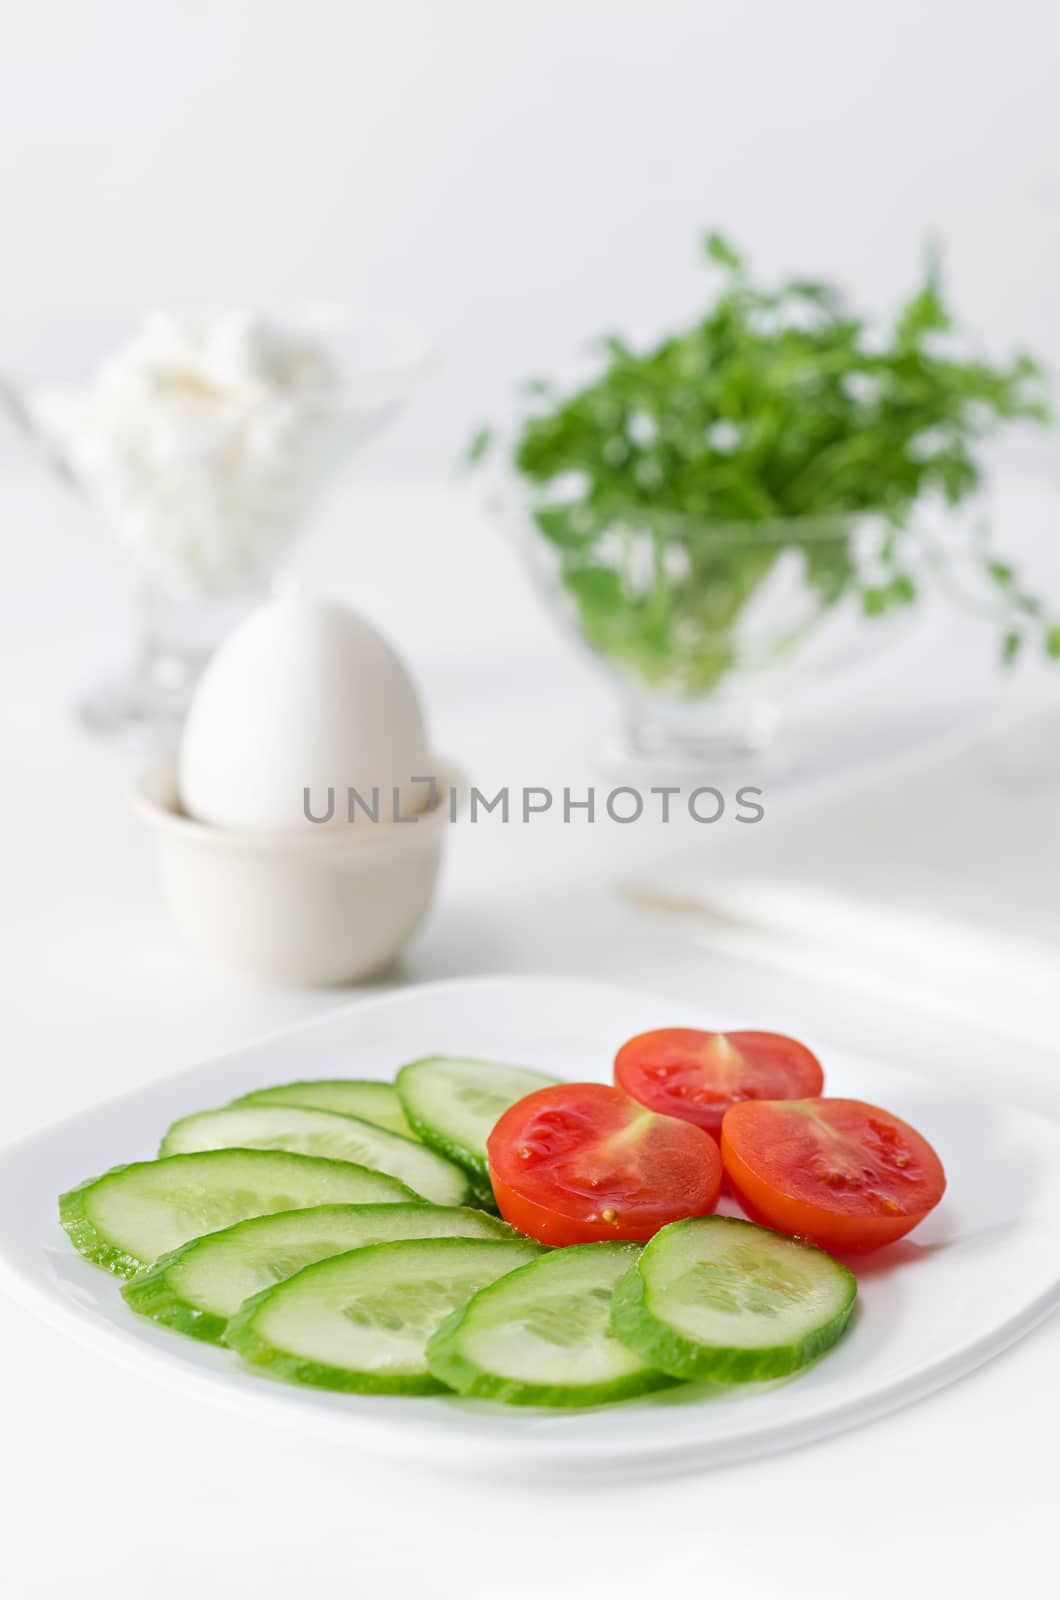 Sliced tomato and cucumber on a plate,  white background. High key, selective focus. by Gaina